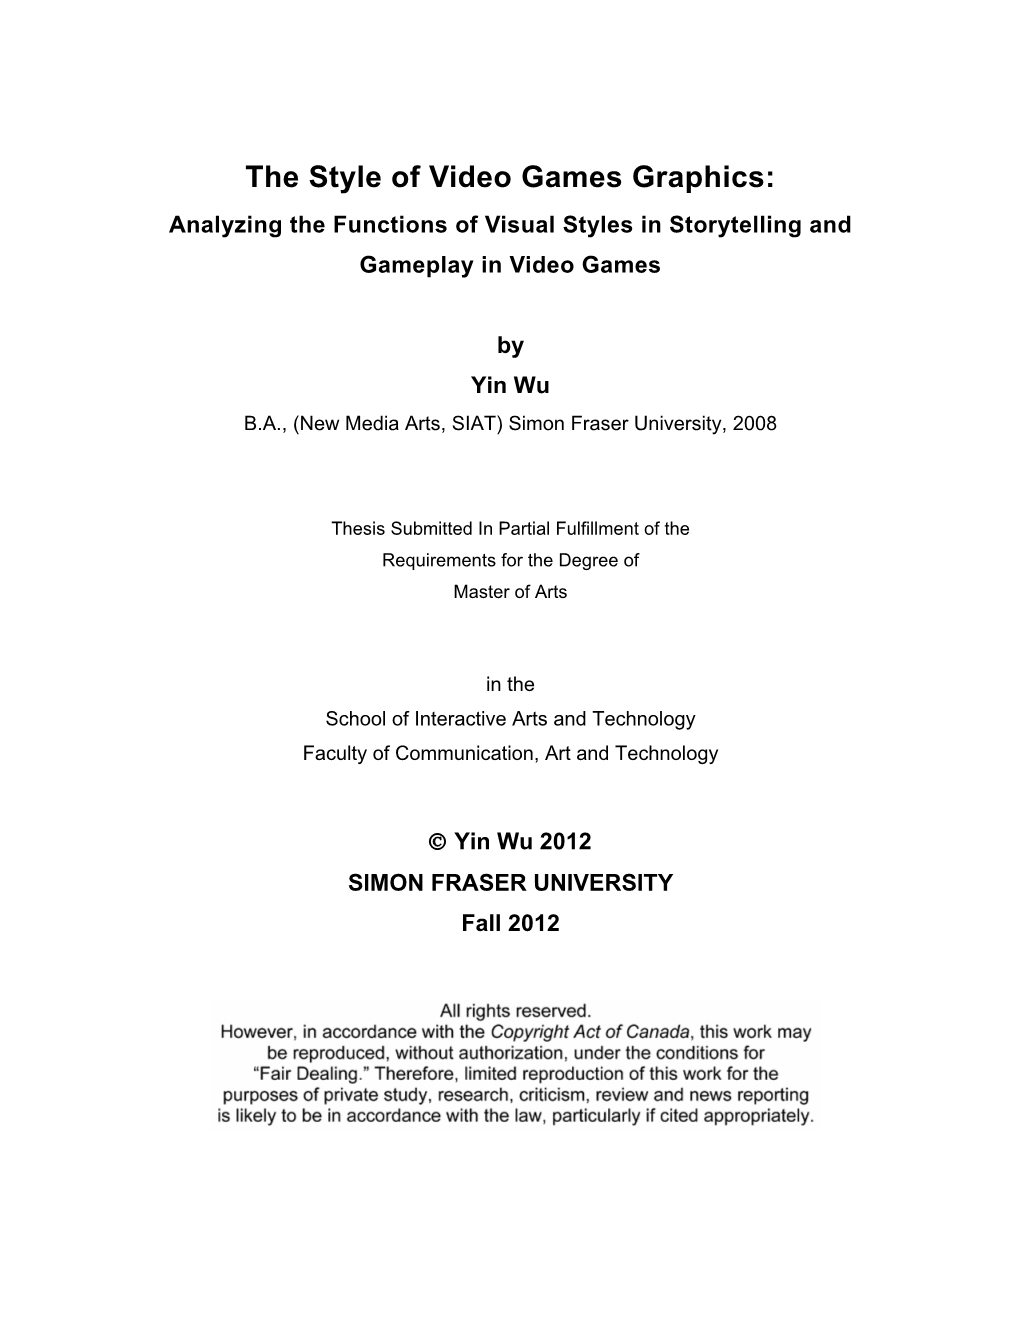 The Style of Video Games Graphics: Analyzing the Functions of Visual Styles in Storytelling and Gameplay in Video Games